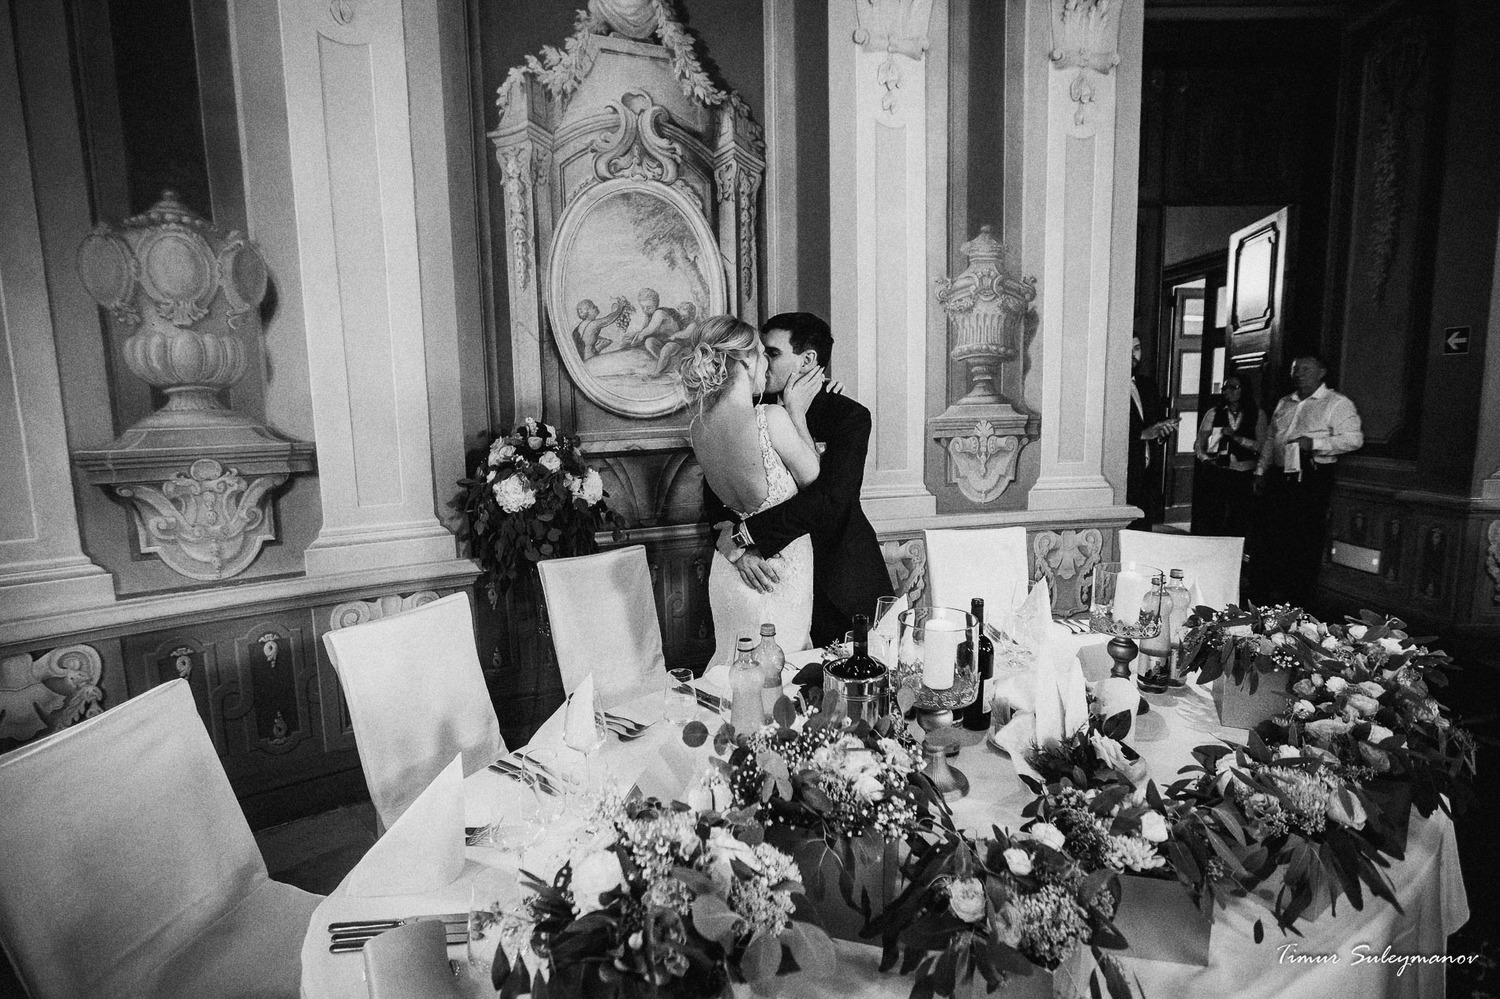 Wedding in the Chateau Liblice